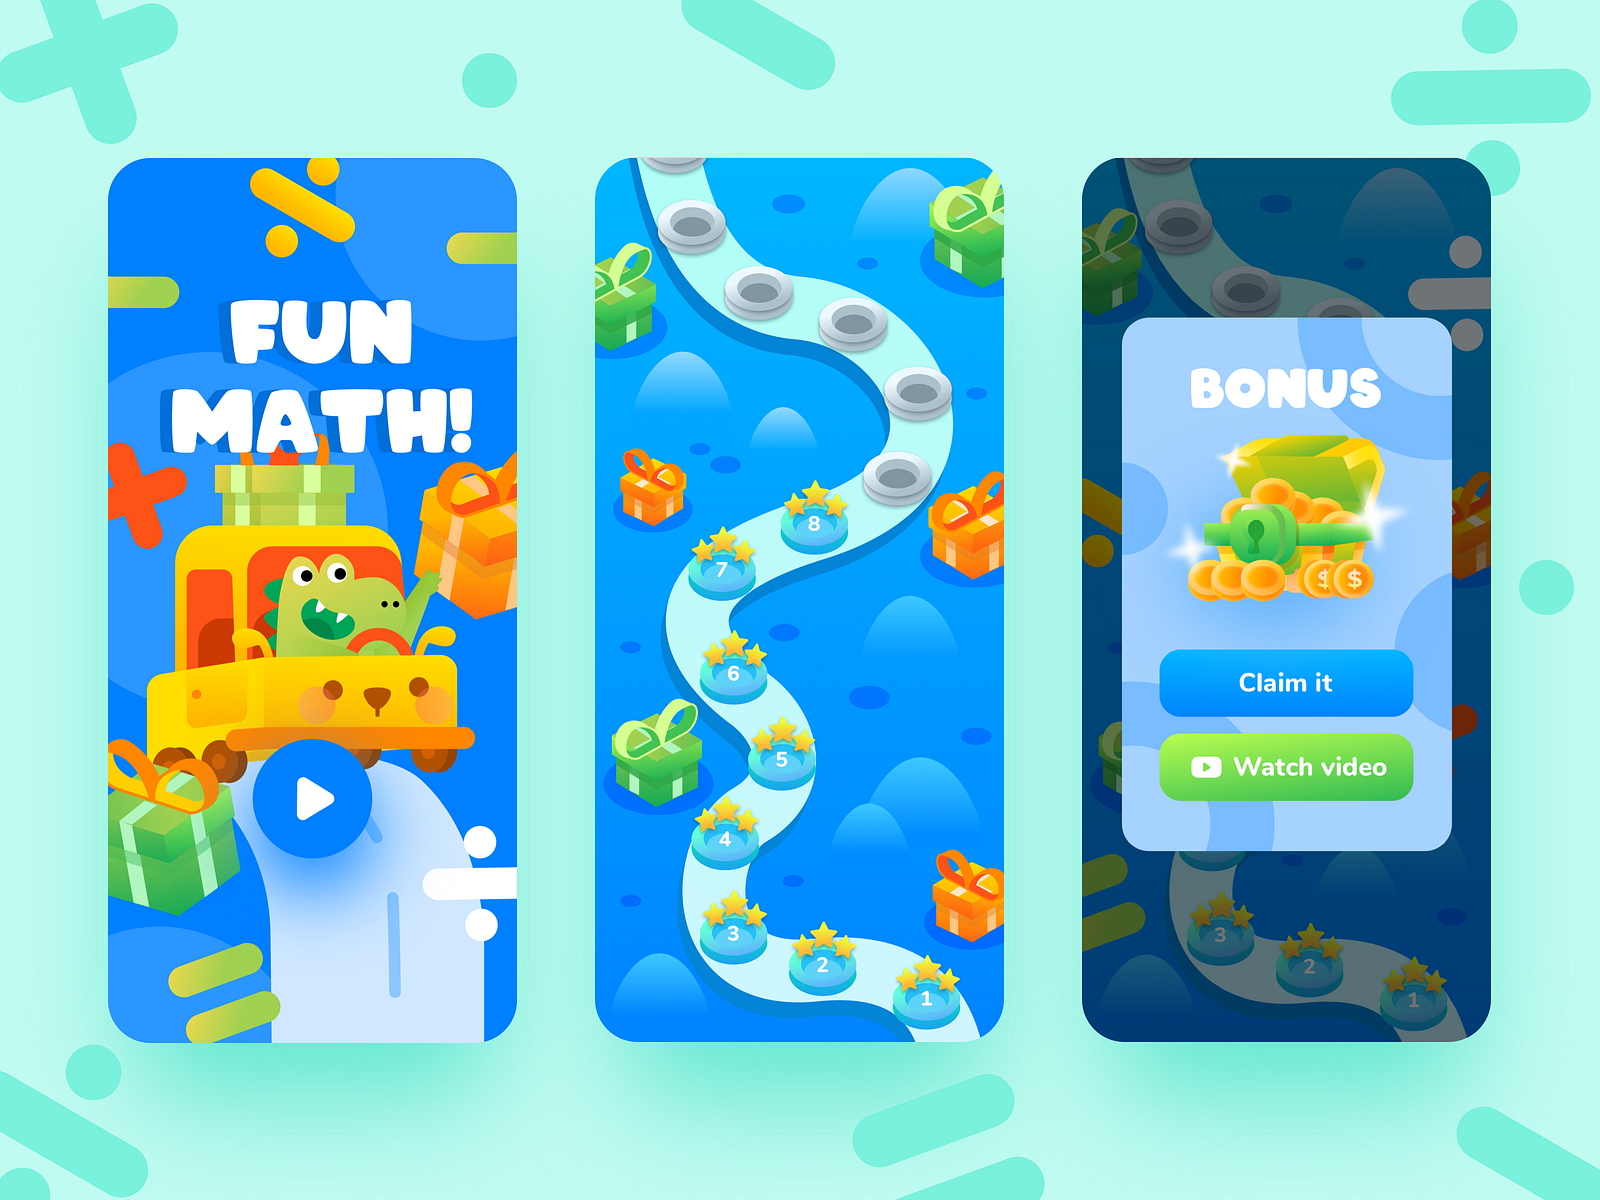 fun-math-game-concept-by-randompopsycle-for-playfull-pixel-party-on